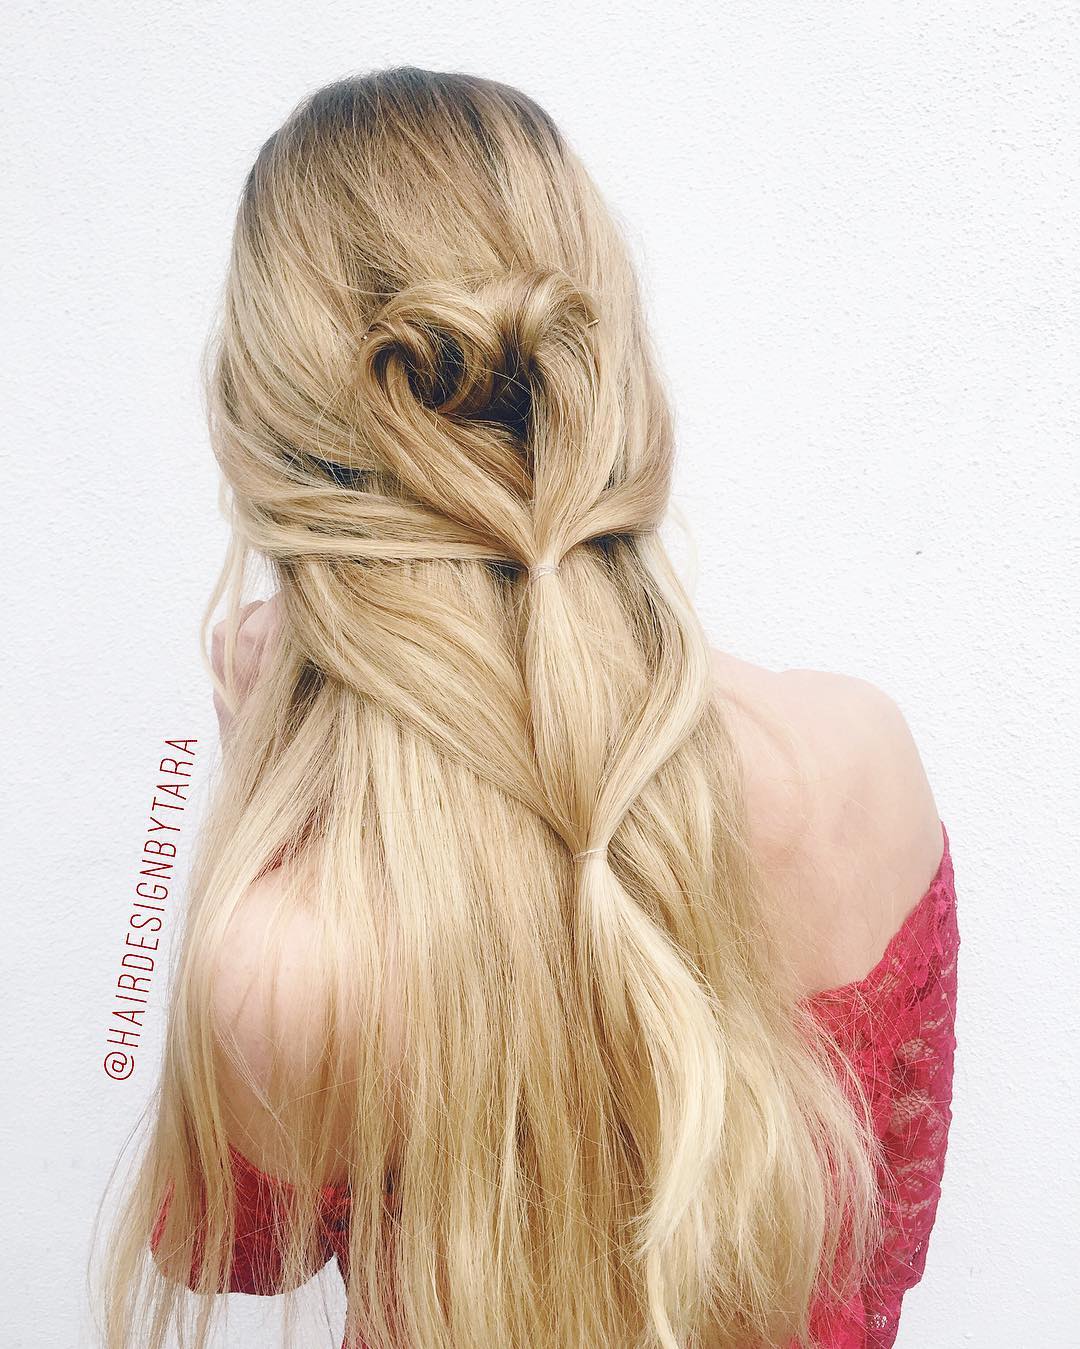 Crazy Twisted Heart Hairstyle